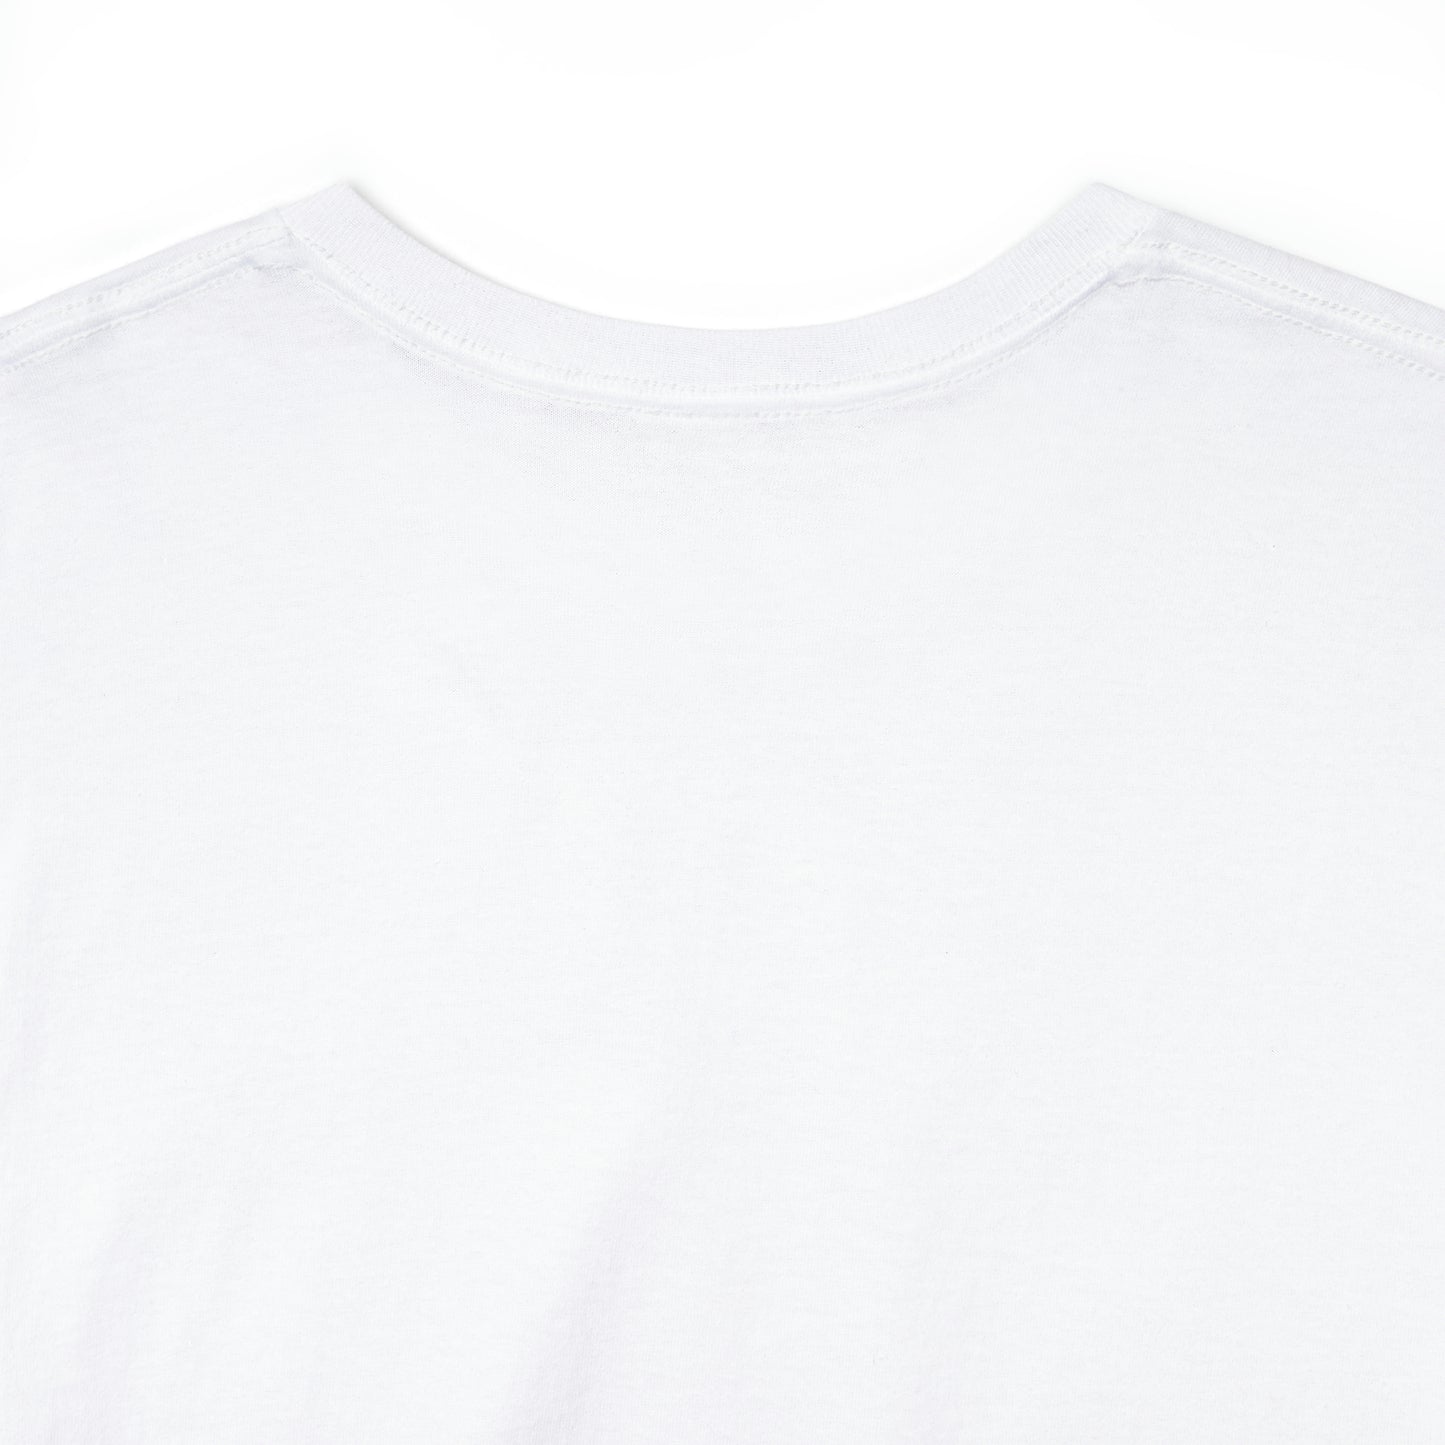 Close up of the back of the crewneck of the white t-shirt